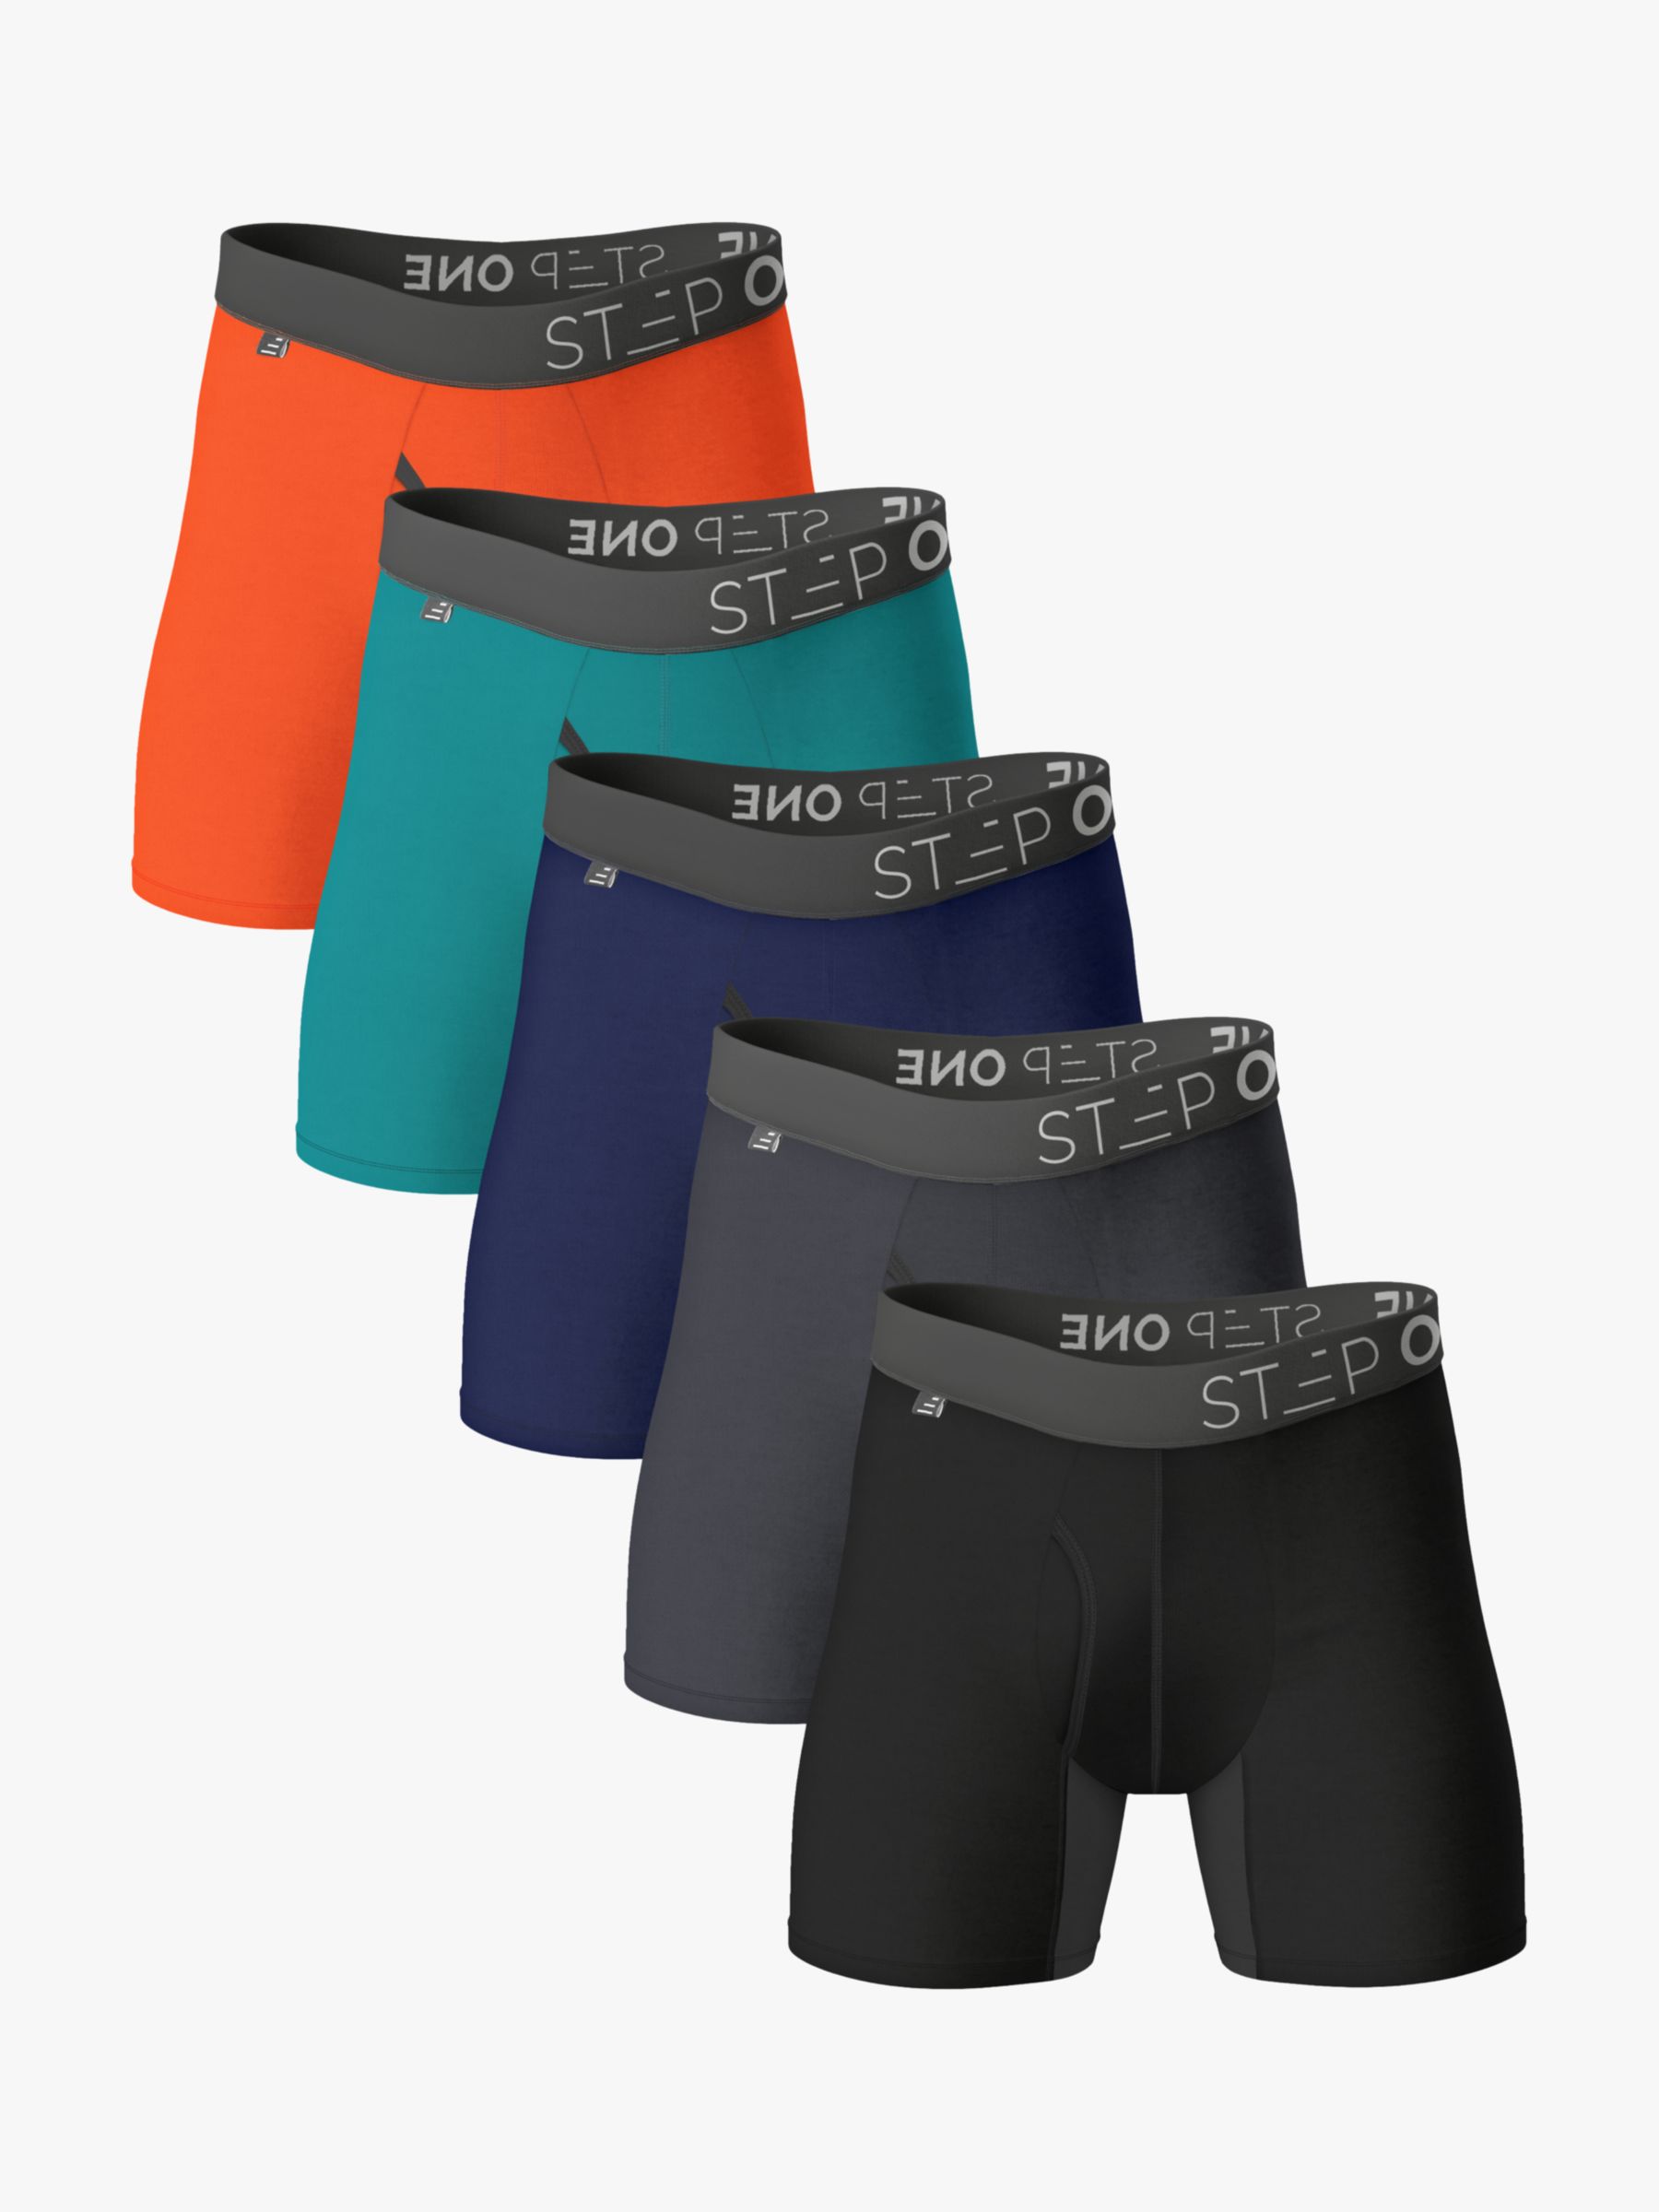 Boxer Brief PLUS - Smashed Avo  Buy Sports Underwear at Step One